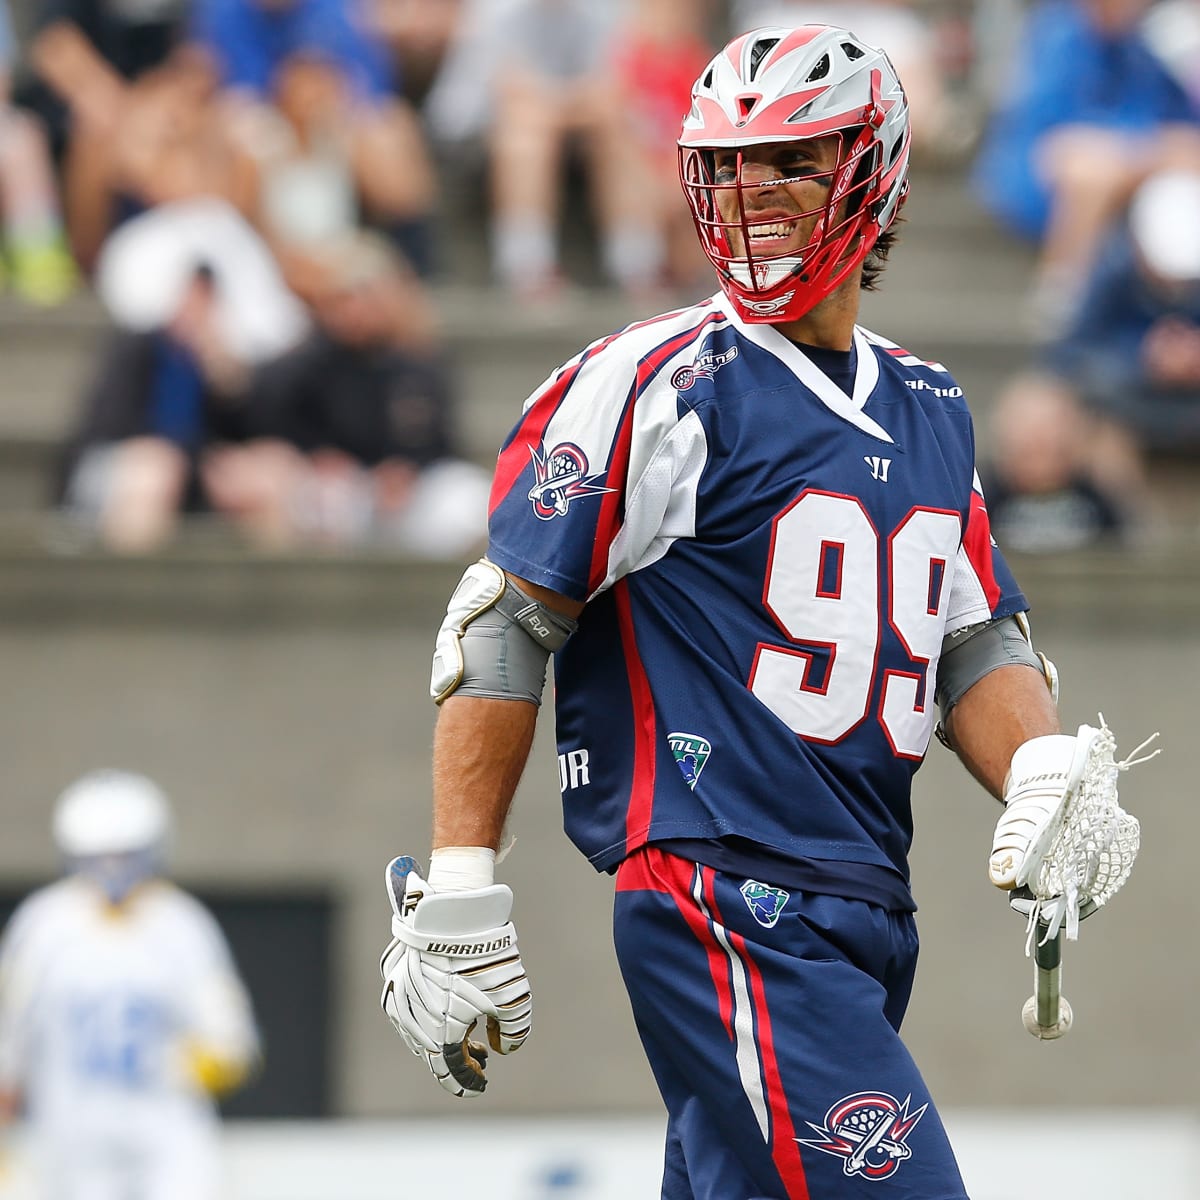 Cannons emphasize each game is important in Major League Lacrosse